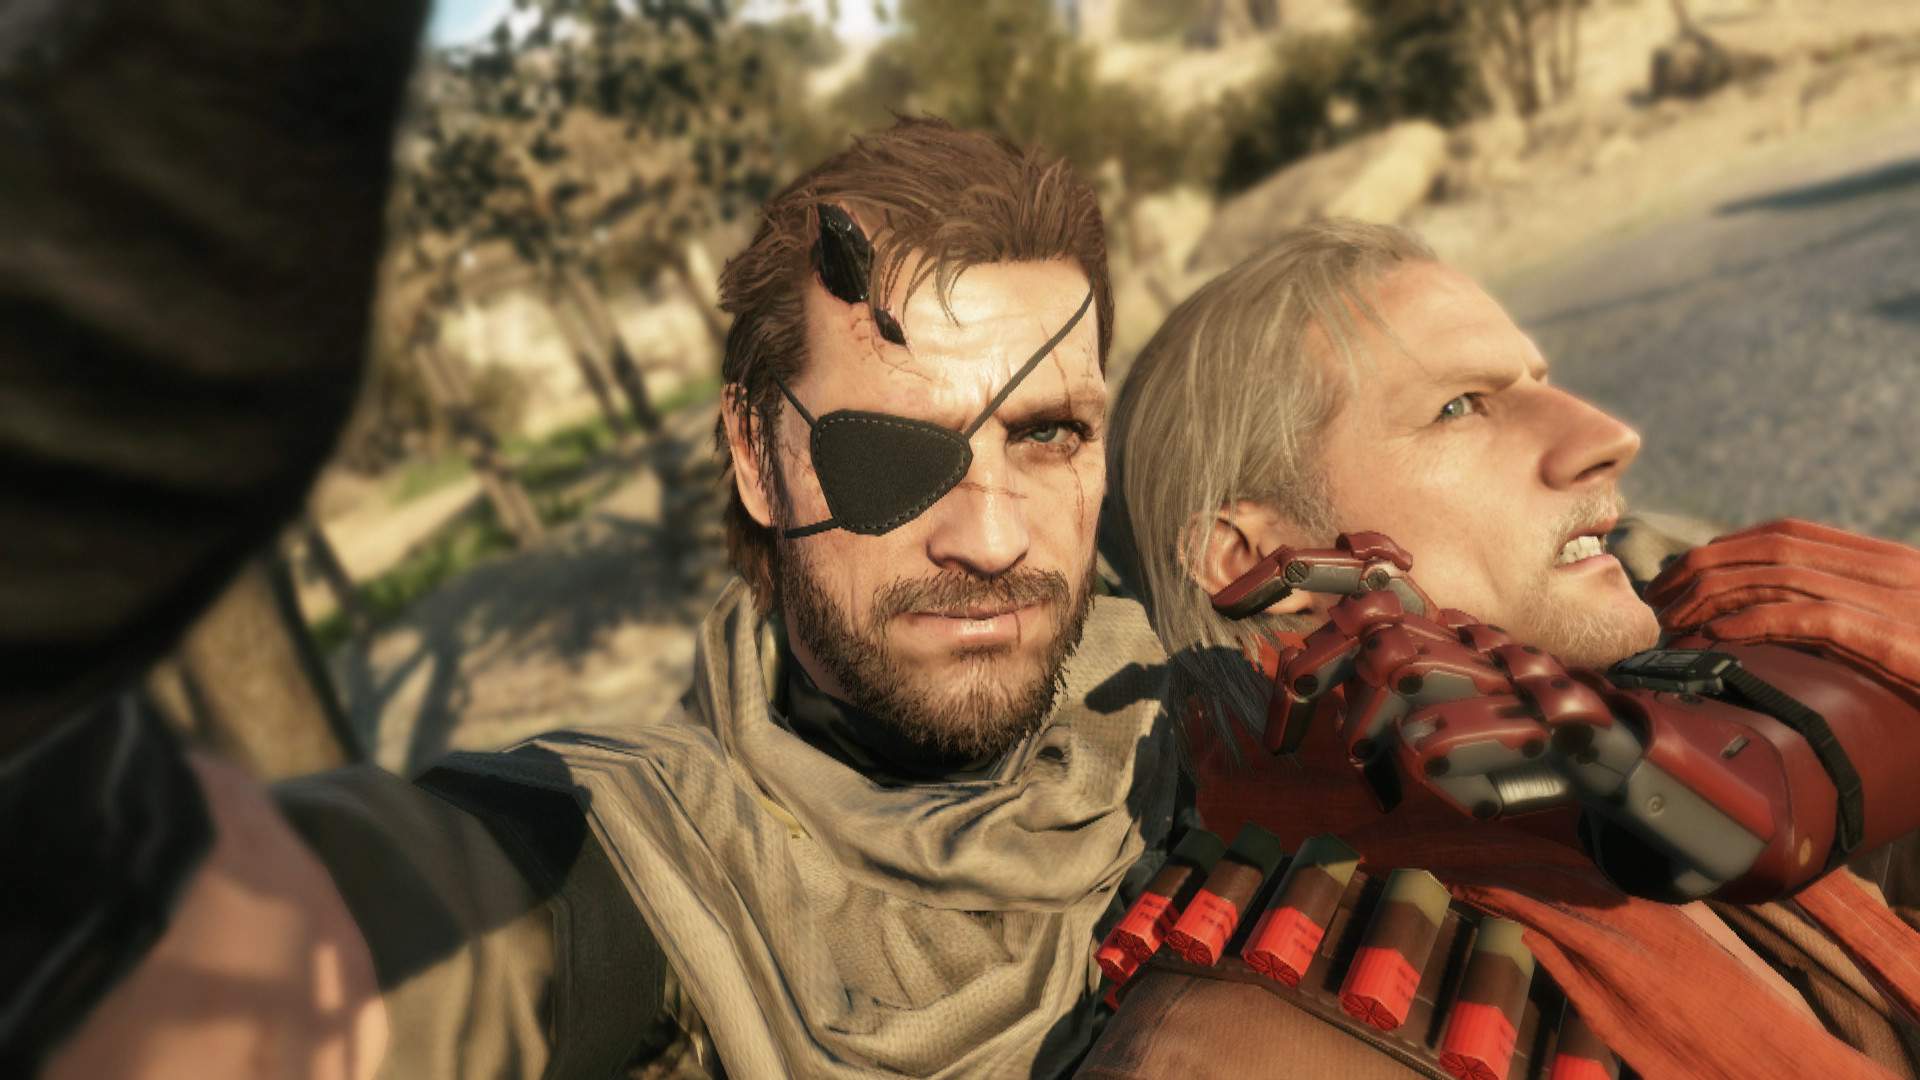 Nice Images Collection: Metal Gear Solid V: The Phantom Pain Desktop Wallpapers